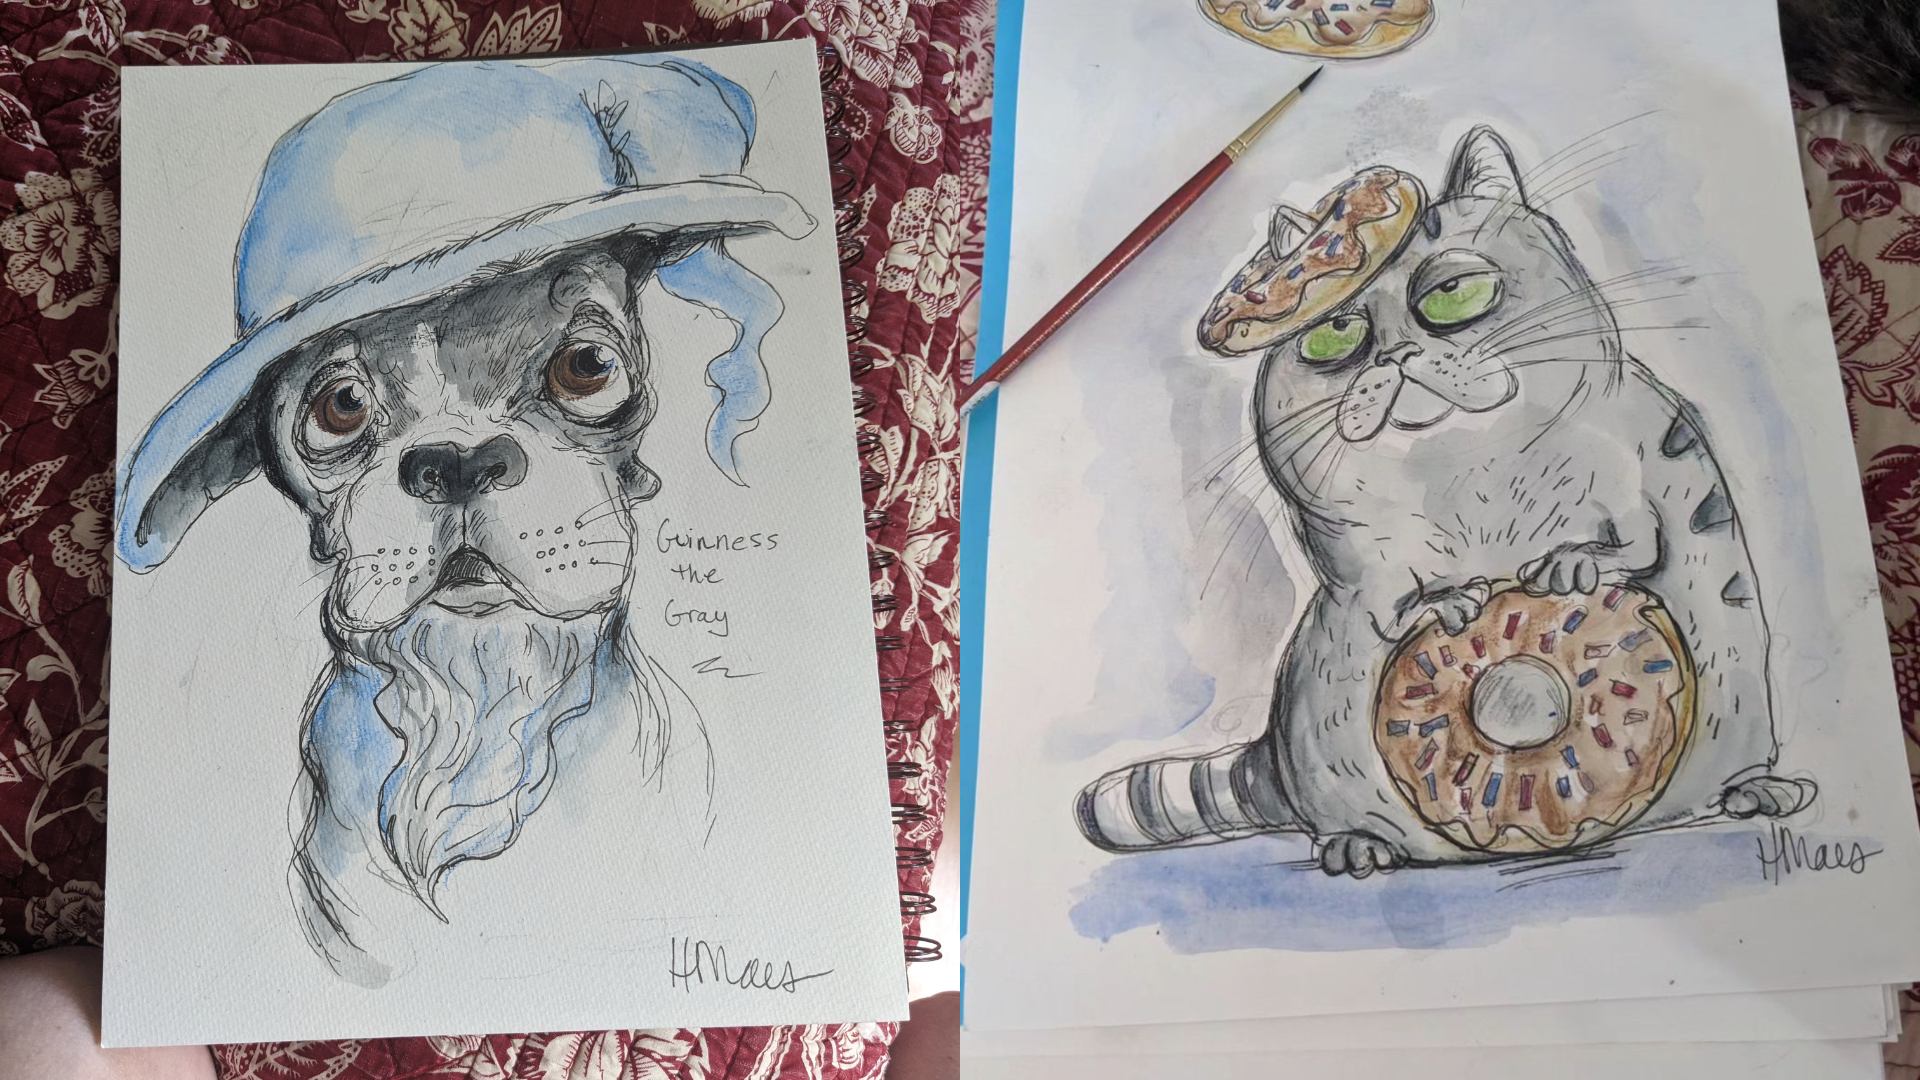 Two ribbon cutting drawings by Heather Maes featuring a cat and a dog with a donut.